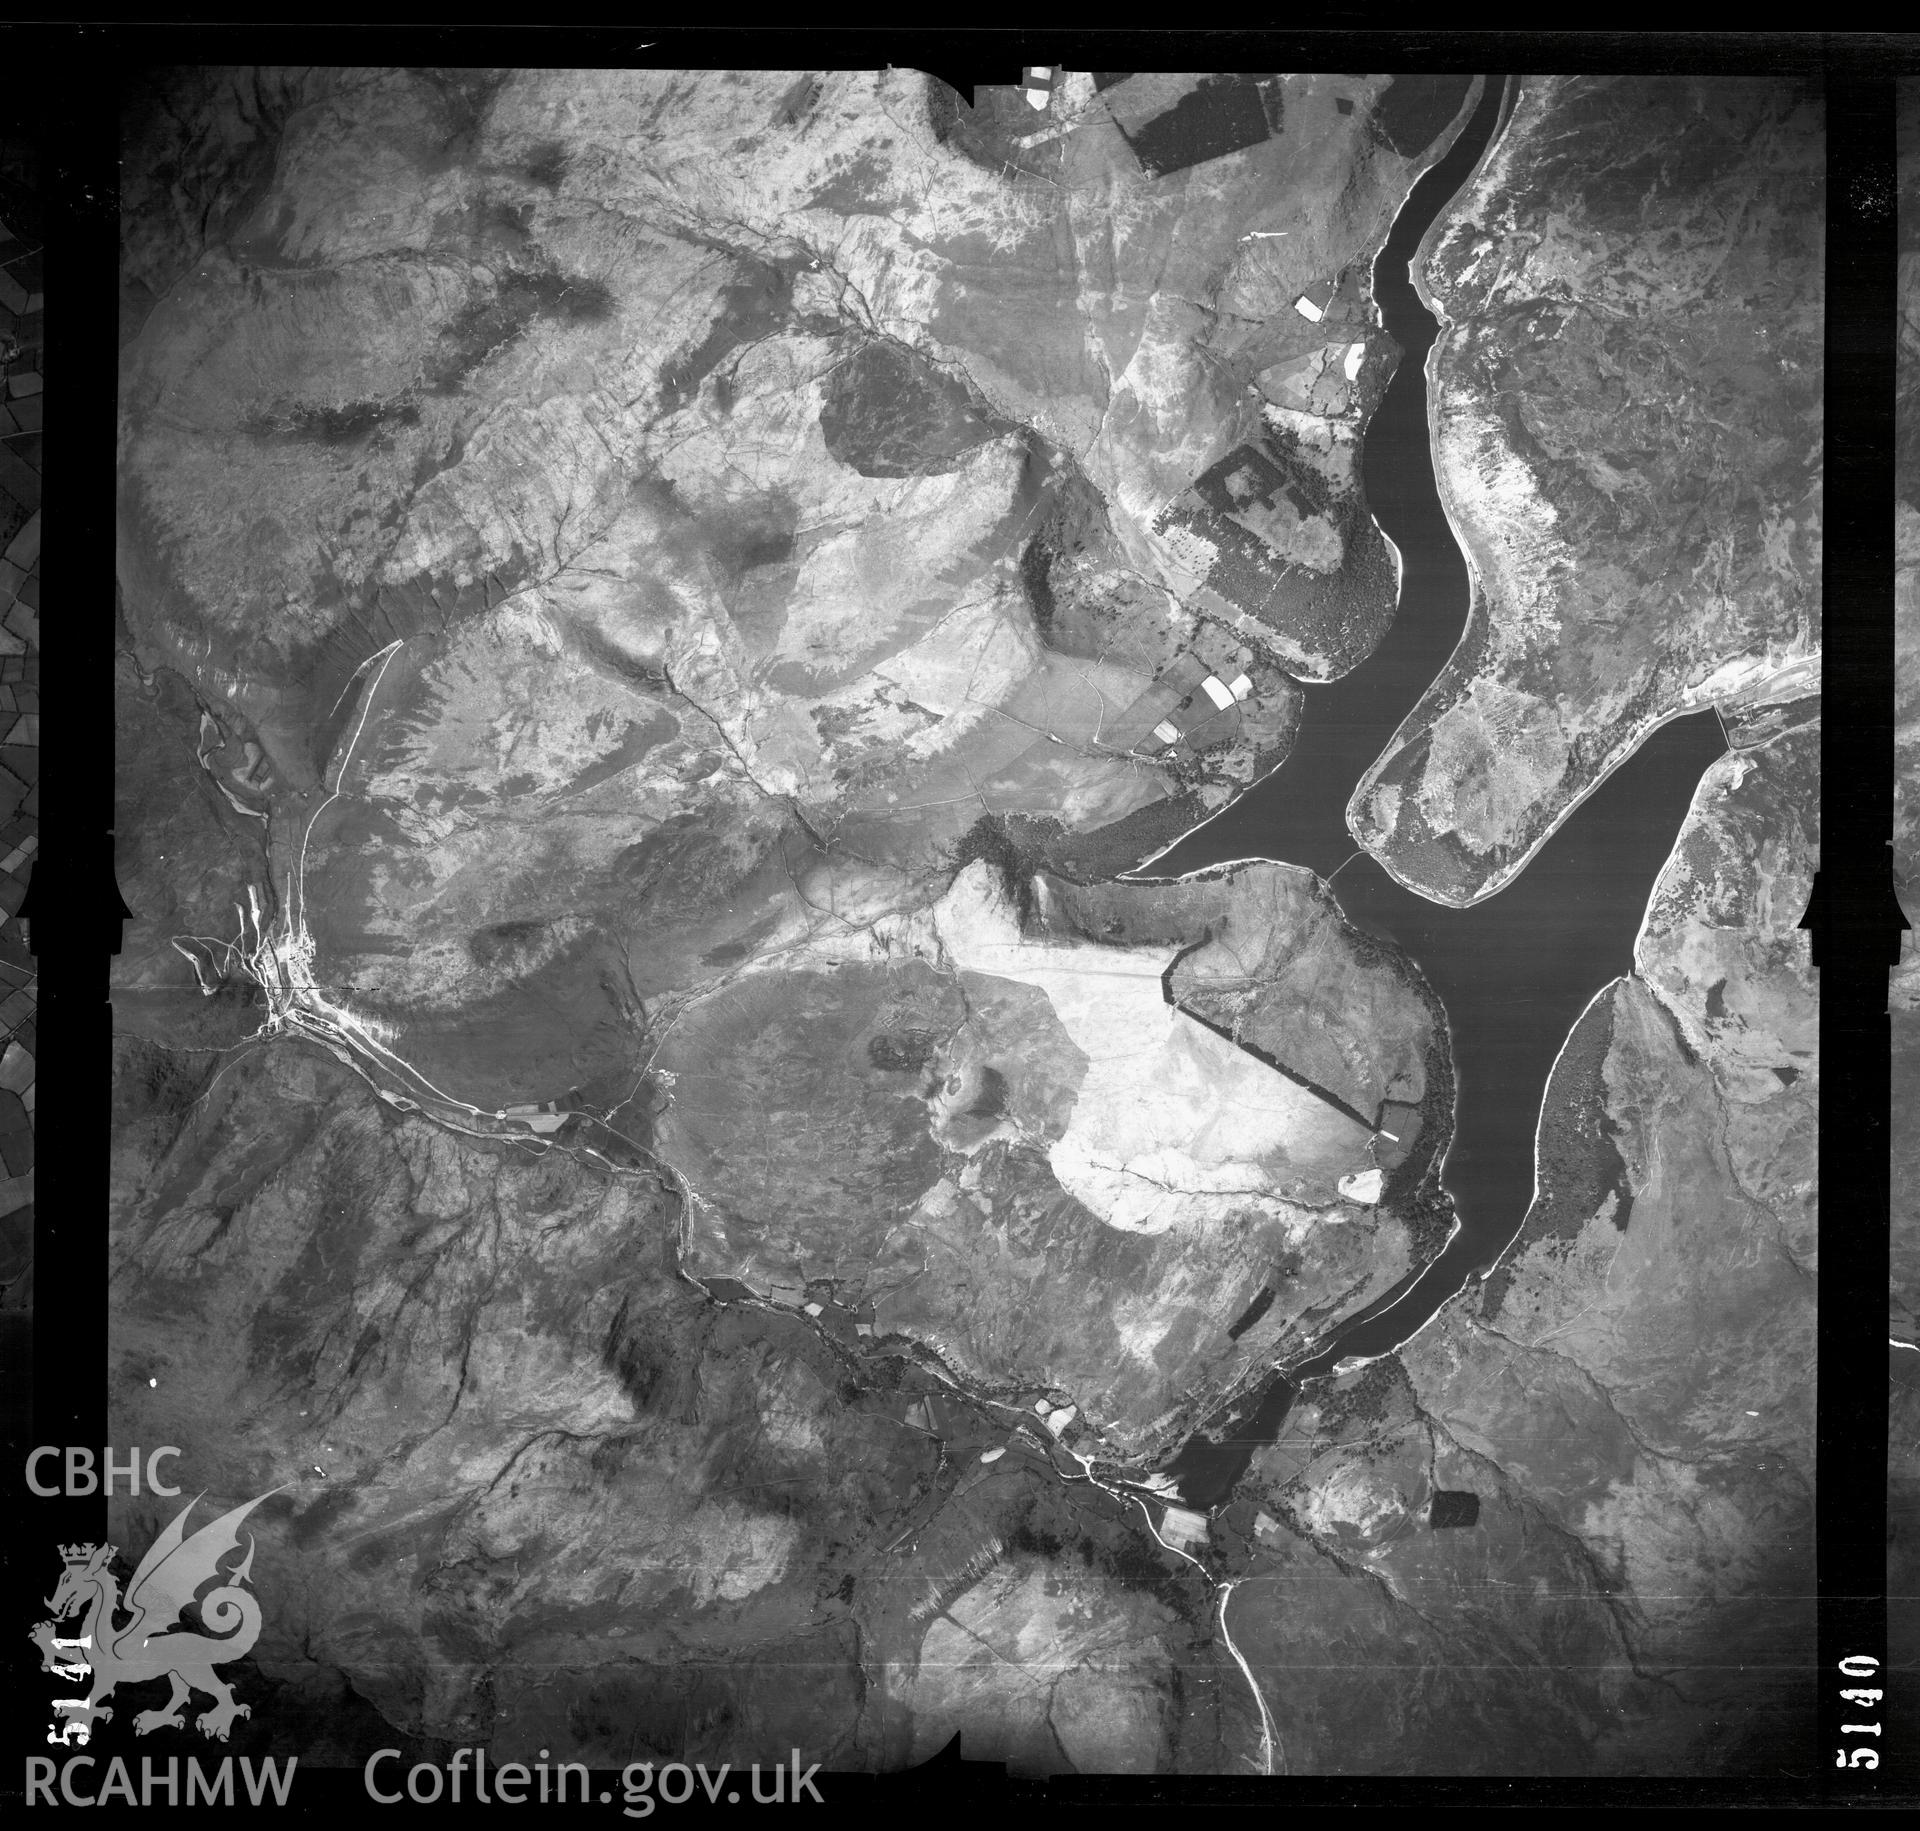 Aerial photograph of the Elan Valley, dated 1948. Included in material relating to Archaeological Desk Based Assessment of Afon Claerwen, Elan Valley, Rhayader, Powys. Assessment conducted by Archaeology Wales in 2017-18. Report no. 1633. Project no. 2573.